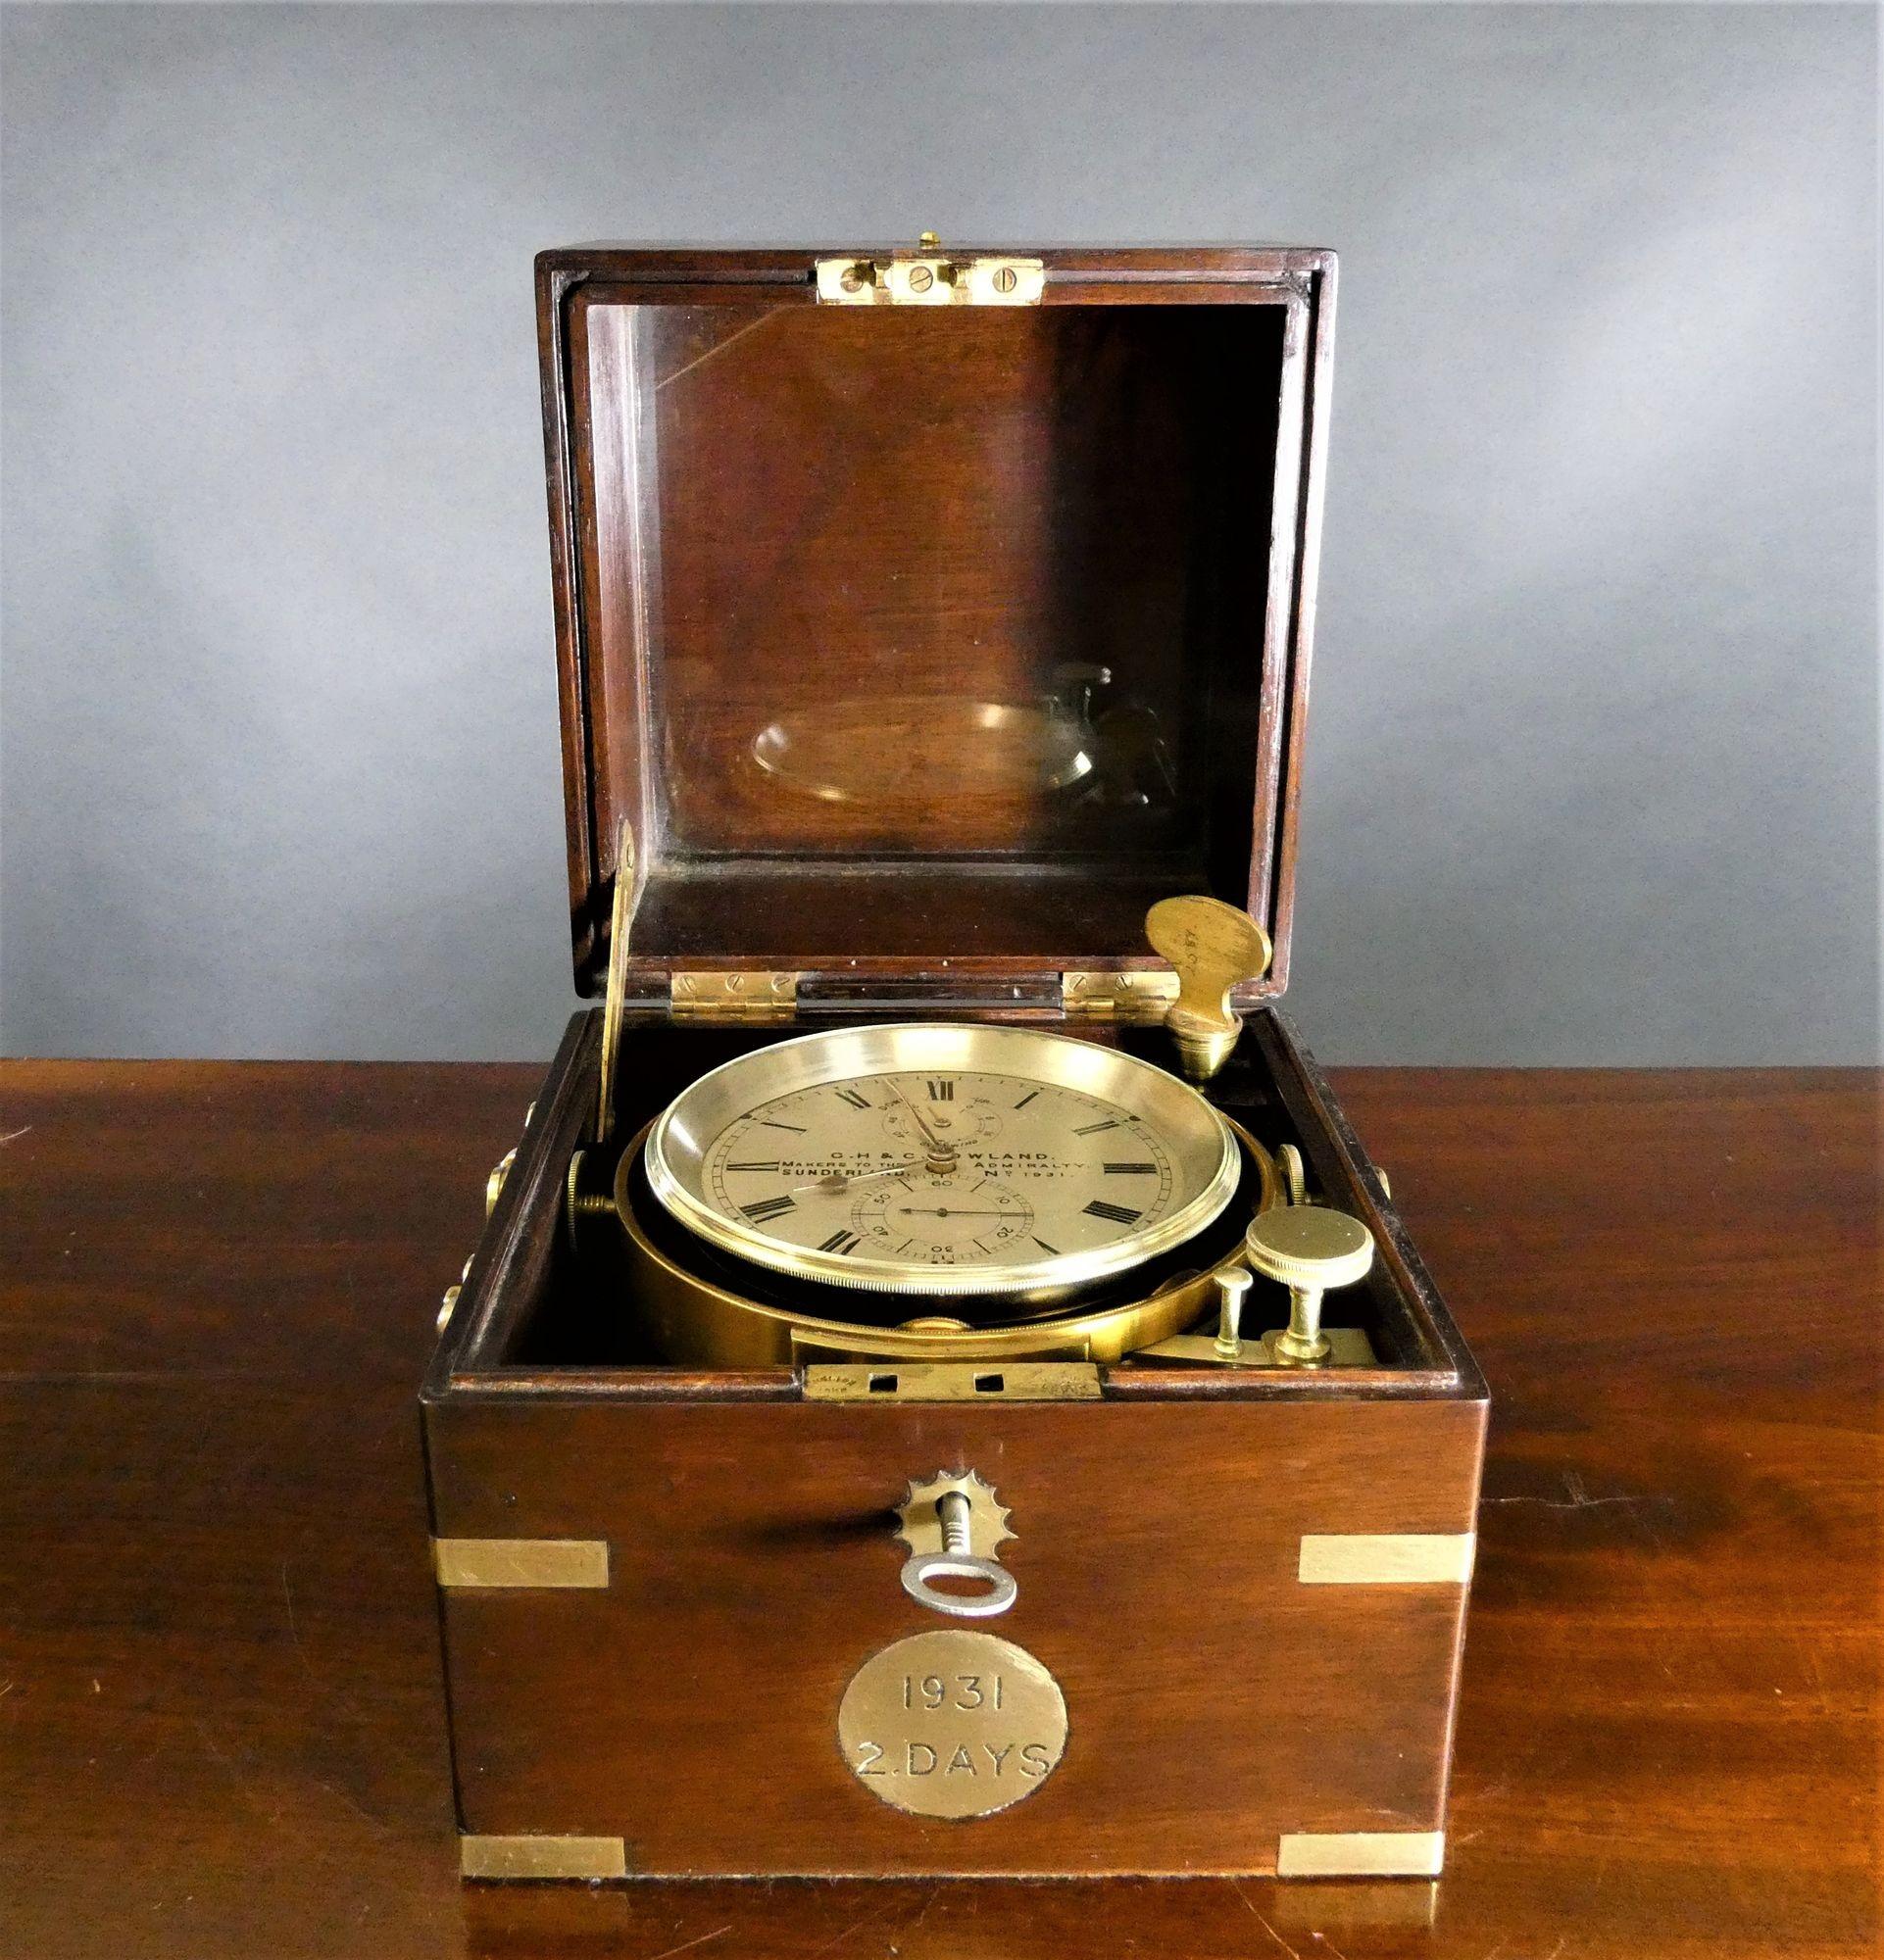 A fine two Day Marine Chronometer by G.H & C Gowland, Sunderland No. 1931
 
Two day marine chromometer by G.H & C Gowland housed in a beautiful three tier mahogany brass bound box with brass carrying handles to the sides, inset plaque to the front